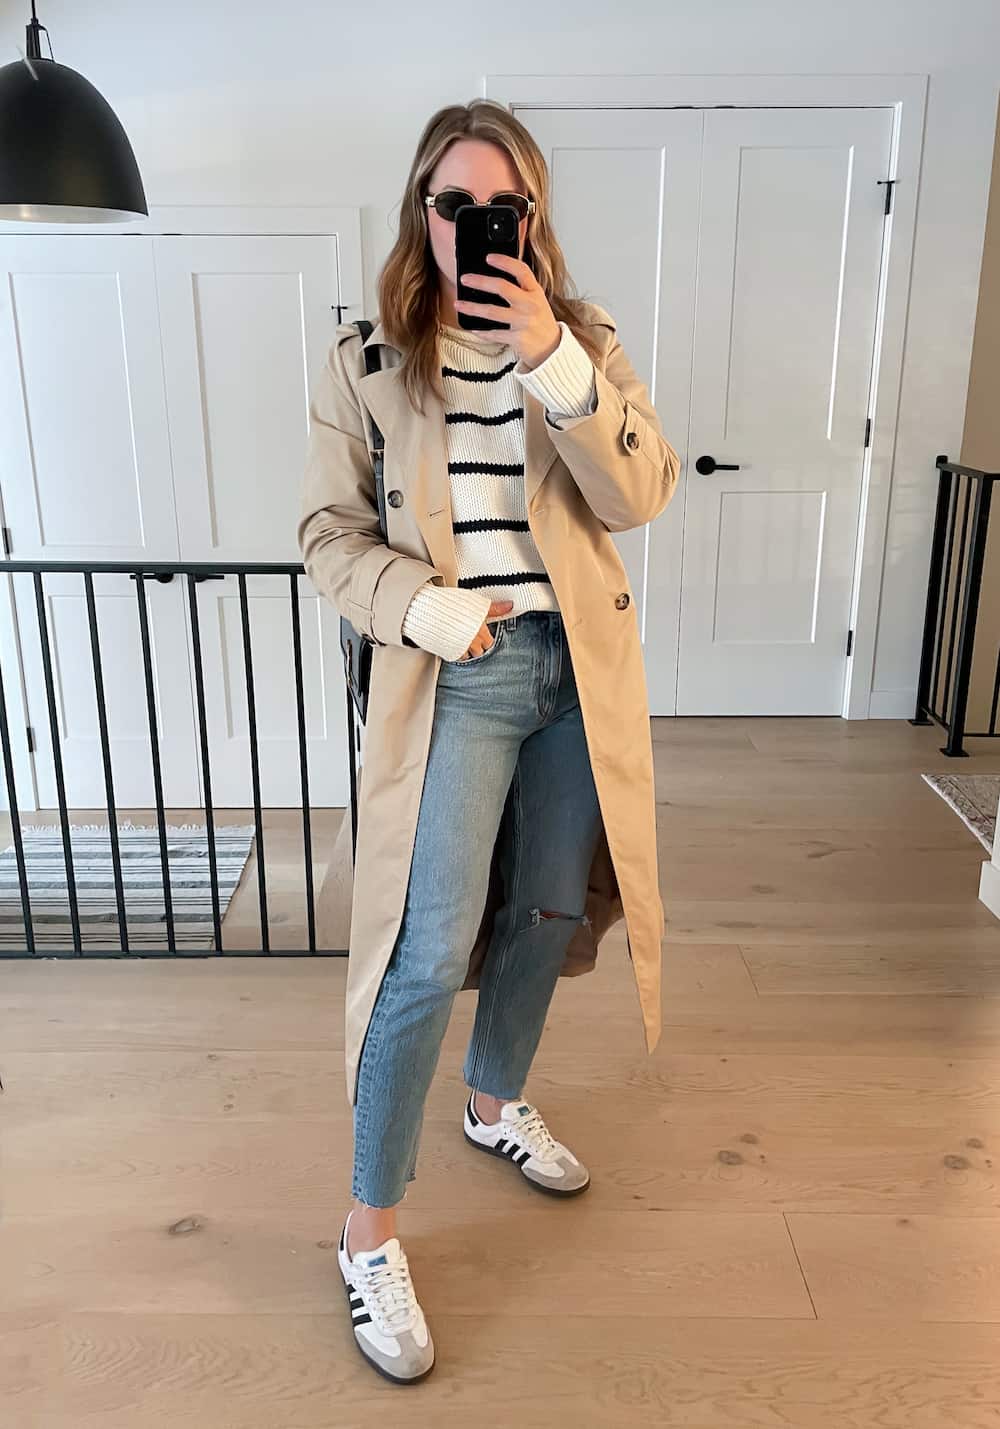 Christal wearing jeans, sneakers, a black and white striped sweater and a tan trench coat.